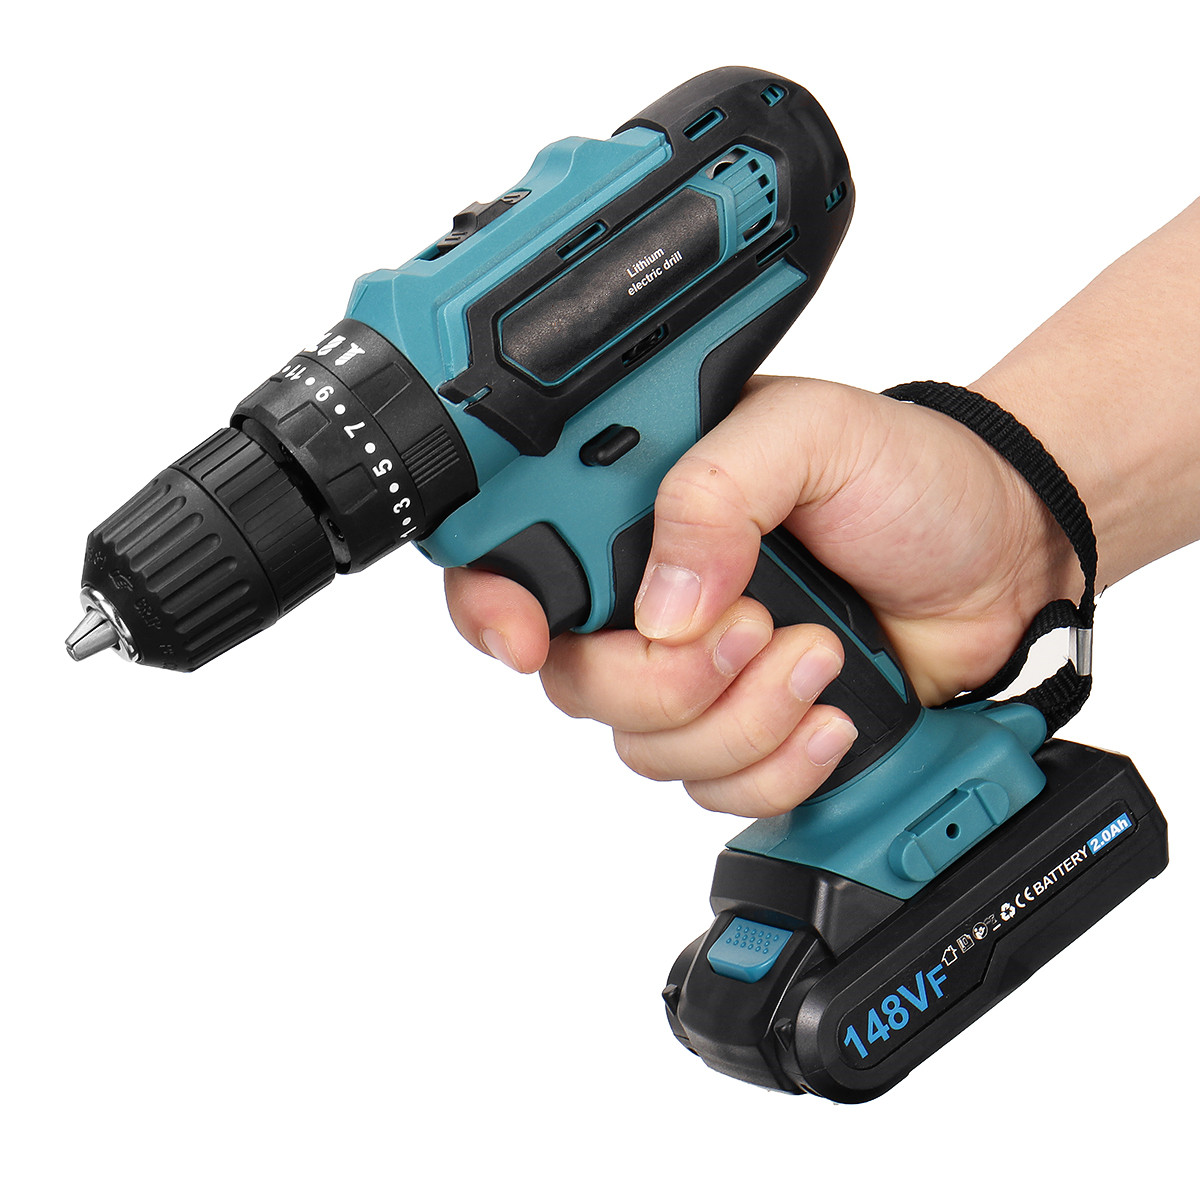 148VF-20Ah-Cordless-Electric-Impact-Drill-Rechargeable-Drill-Screwdriver-W-1-or-2-Li-ion-Battery-1888042-13